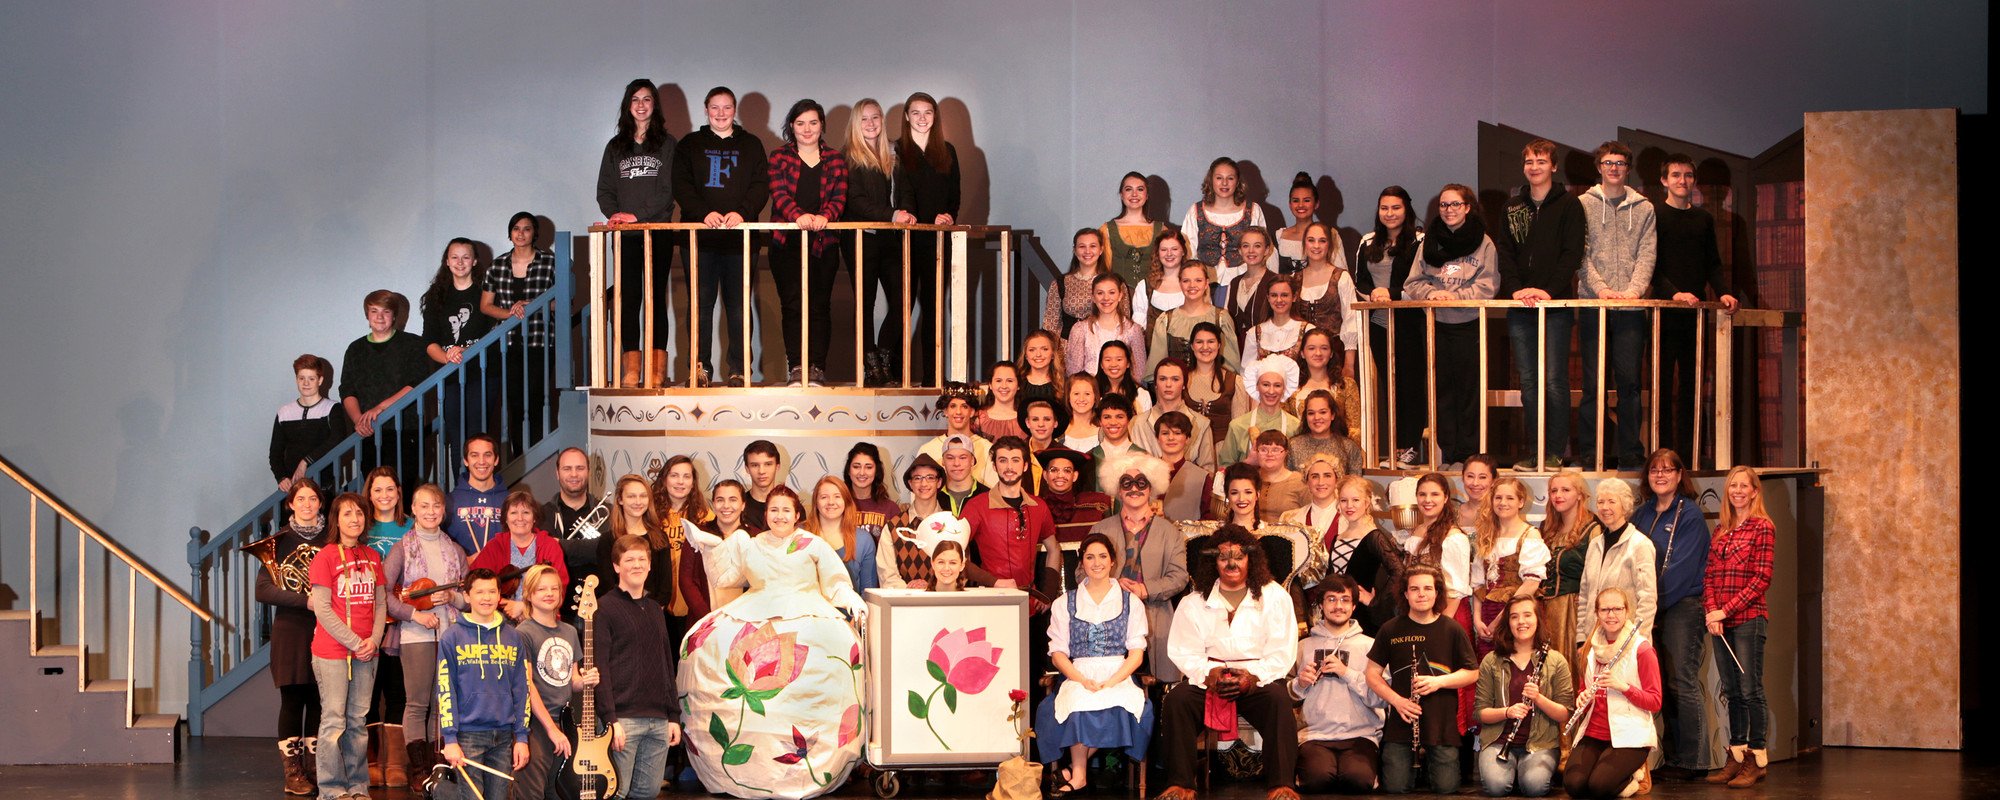 NPHS - Beauty and the Beast Cast Photo